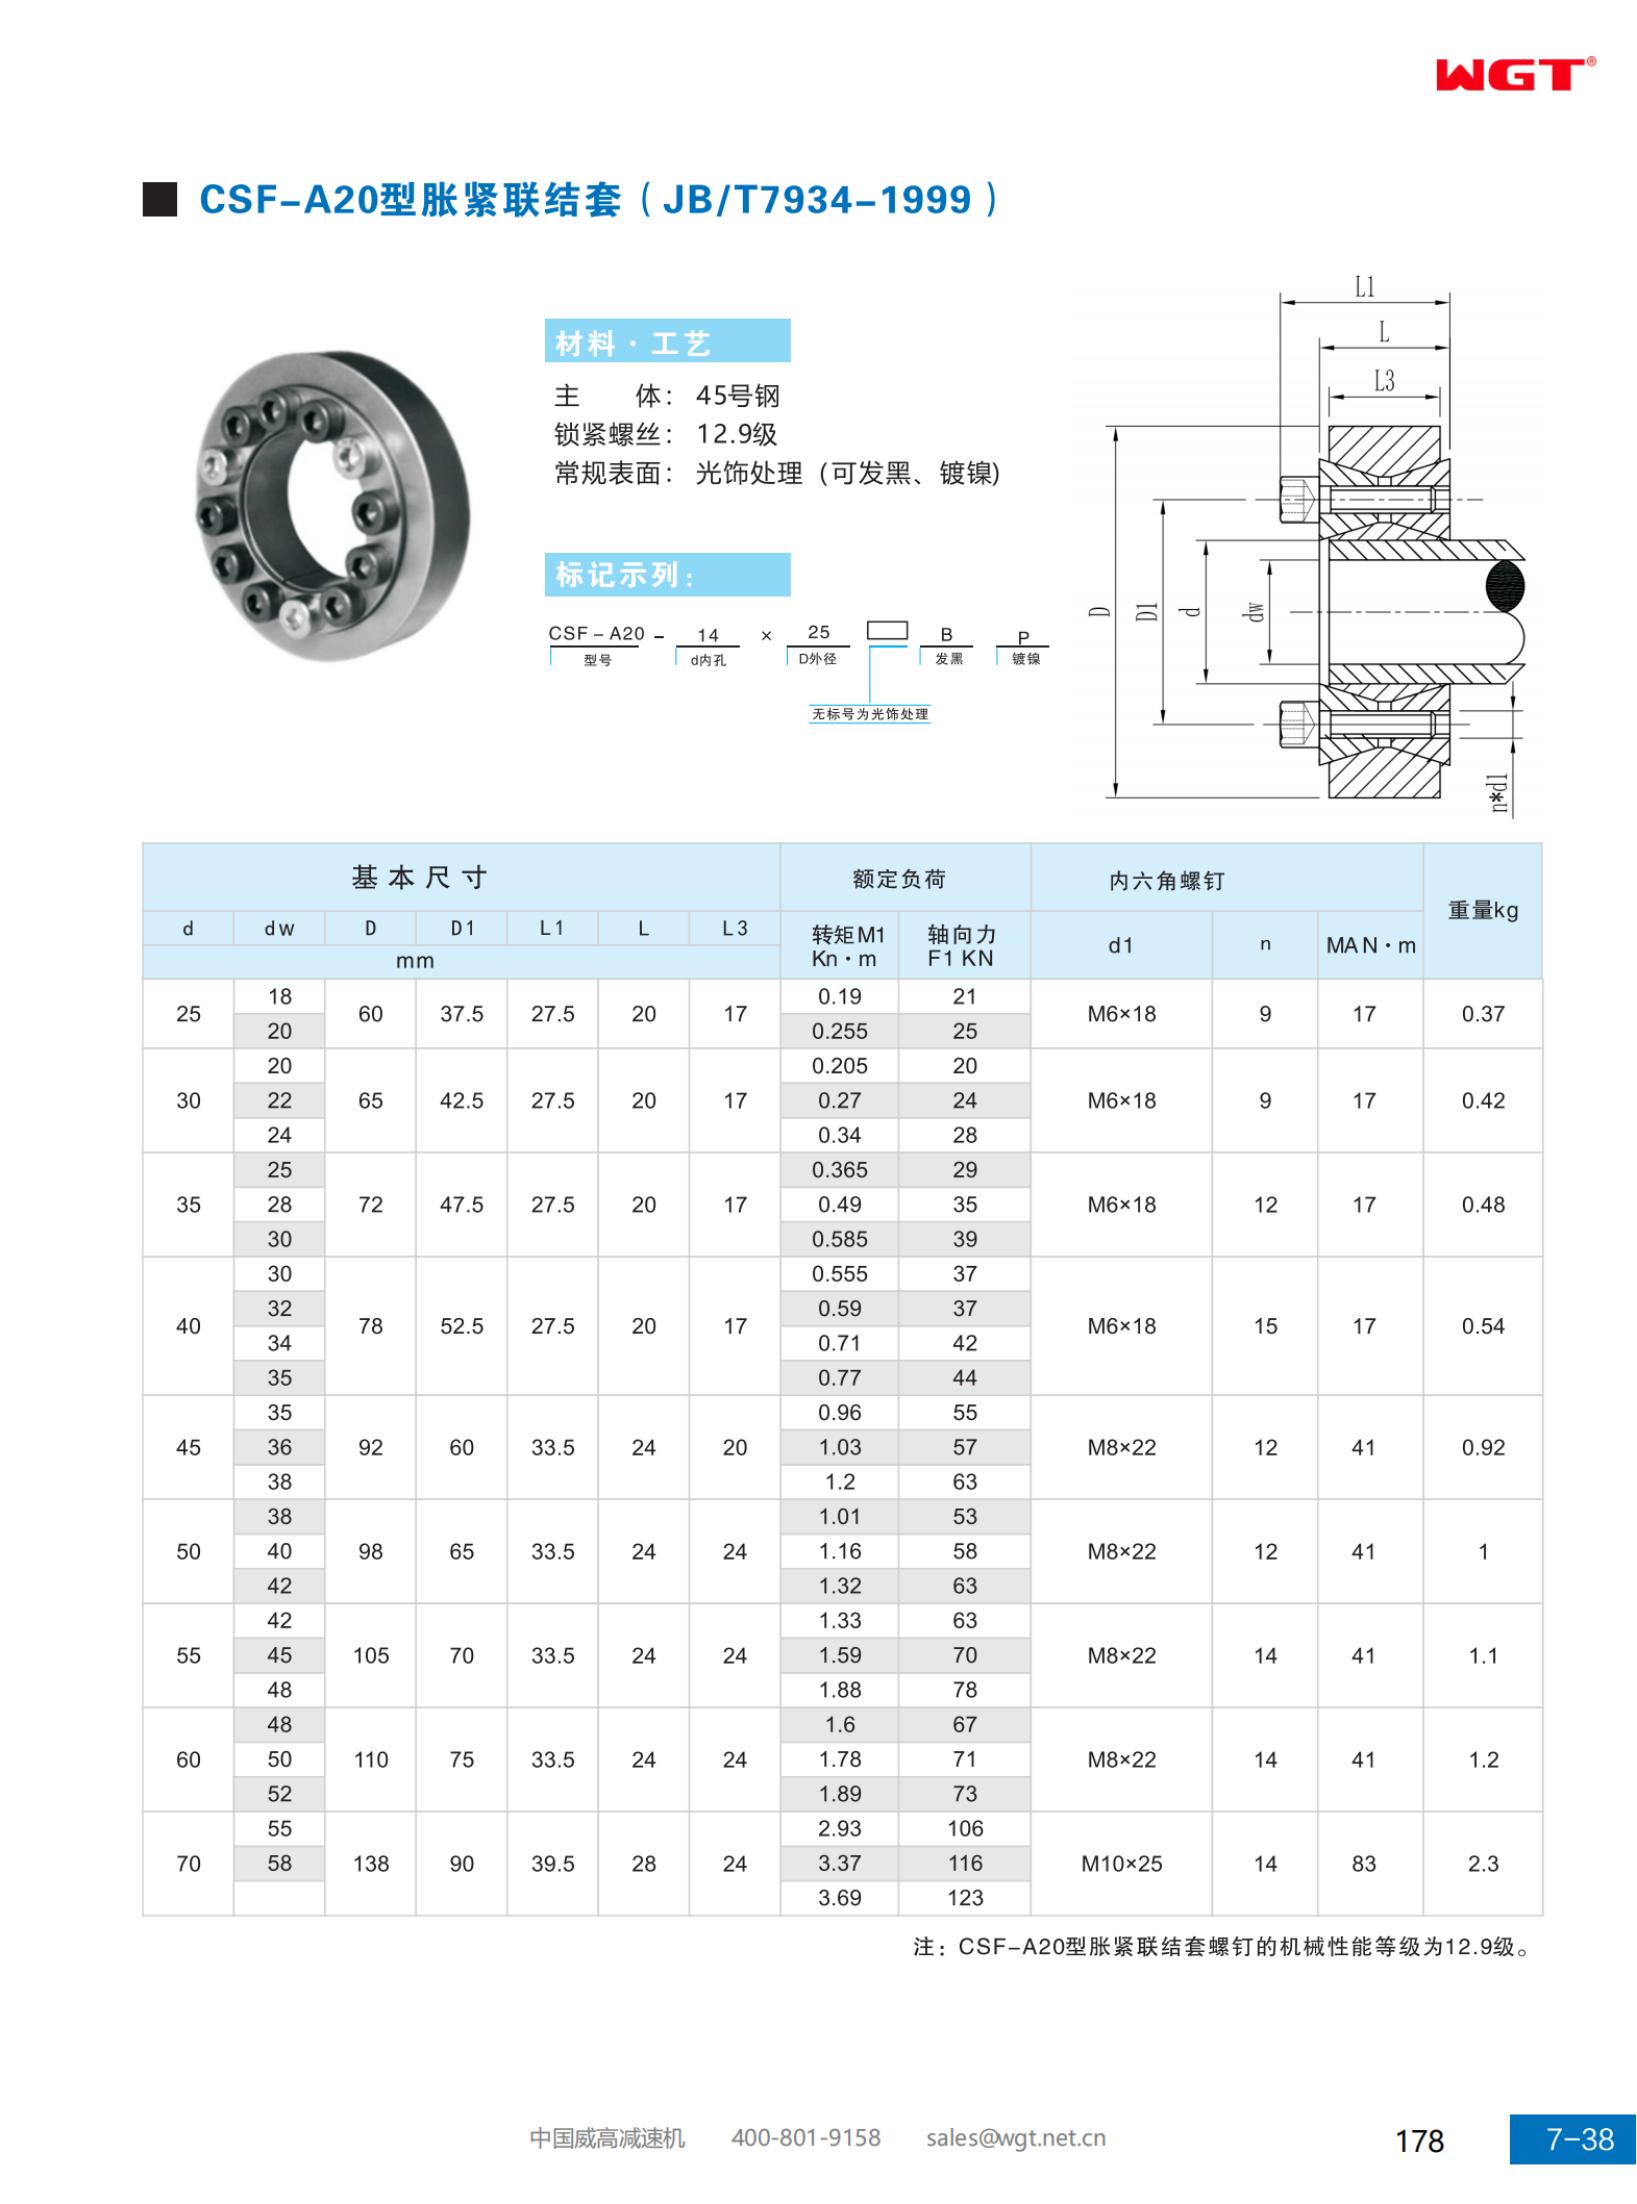 CSF-A20 expansion joint sleeve (JB/T7934-1999)